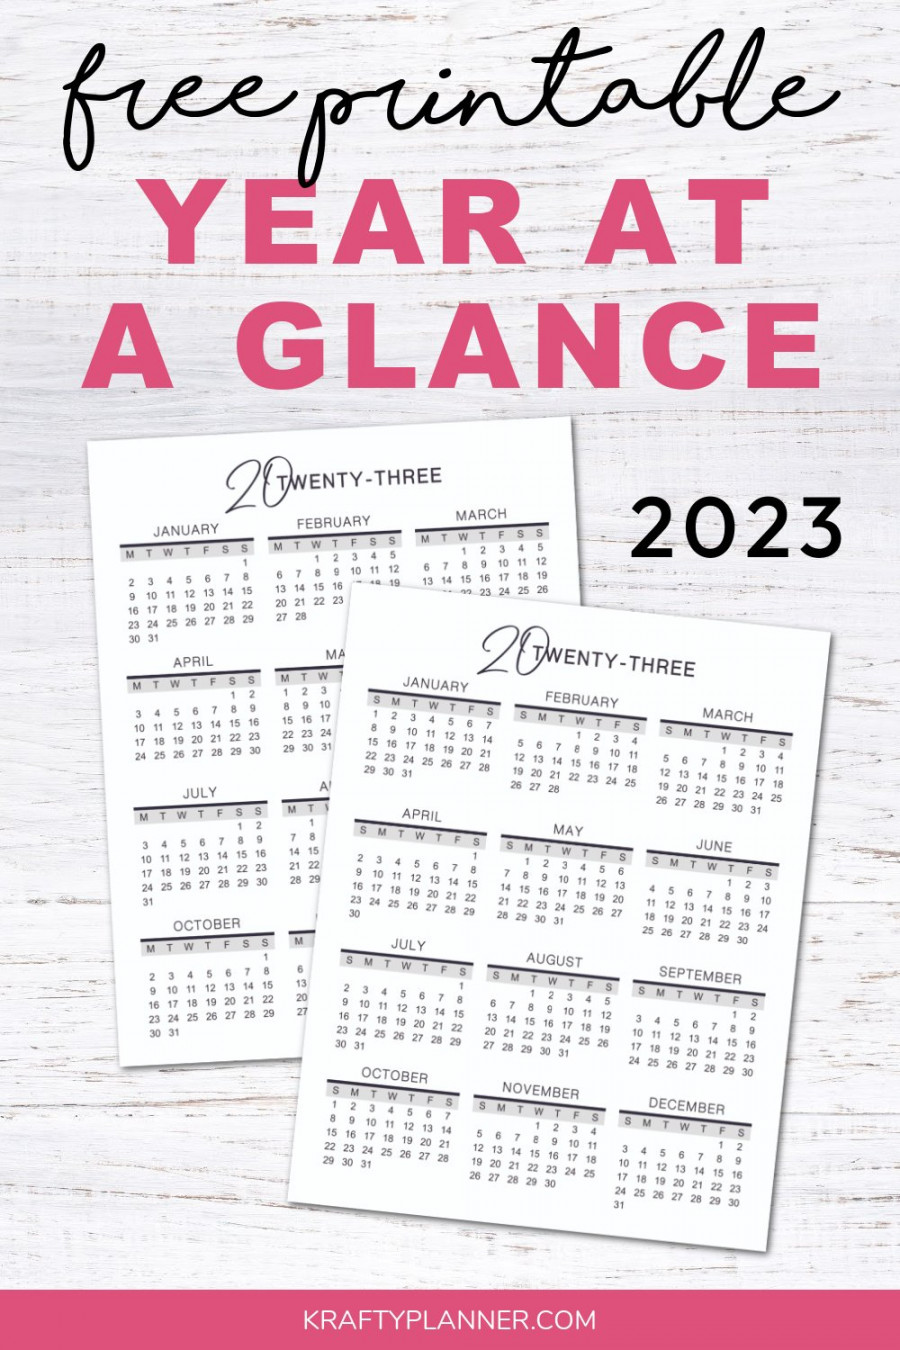 Year-At-A-Glance Free Printable — Krafty Planner